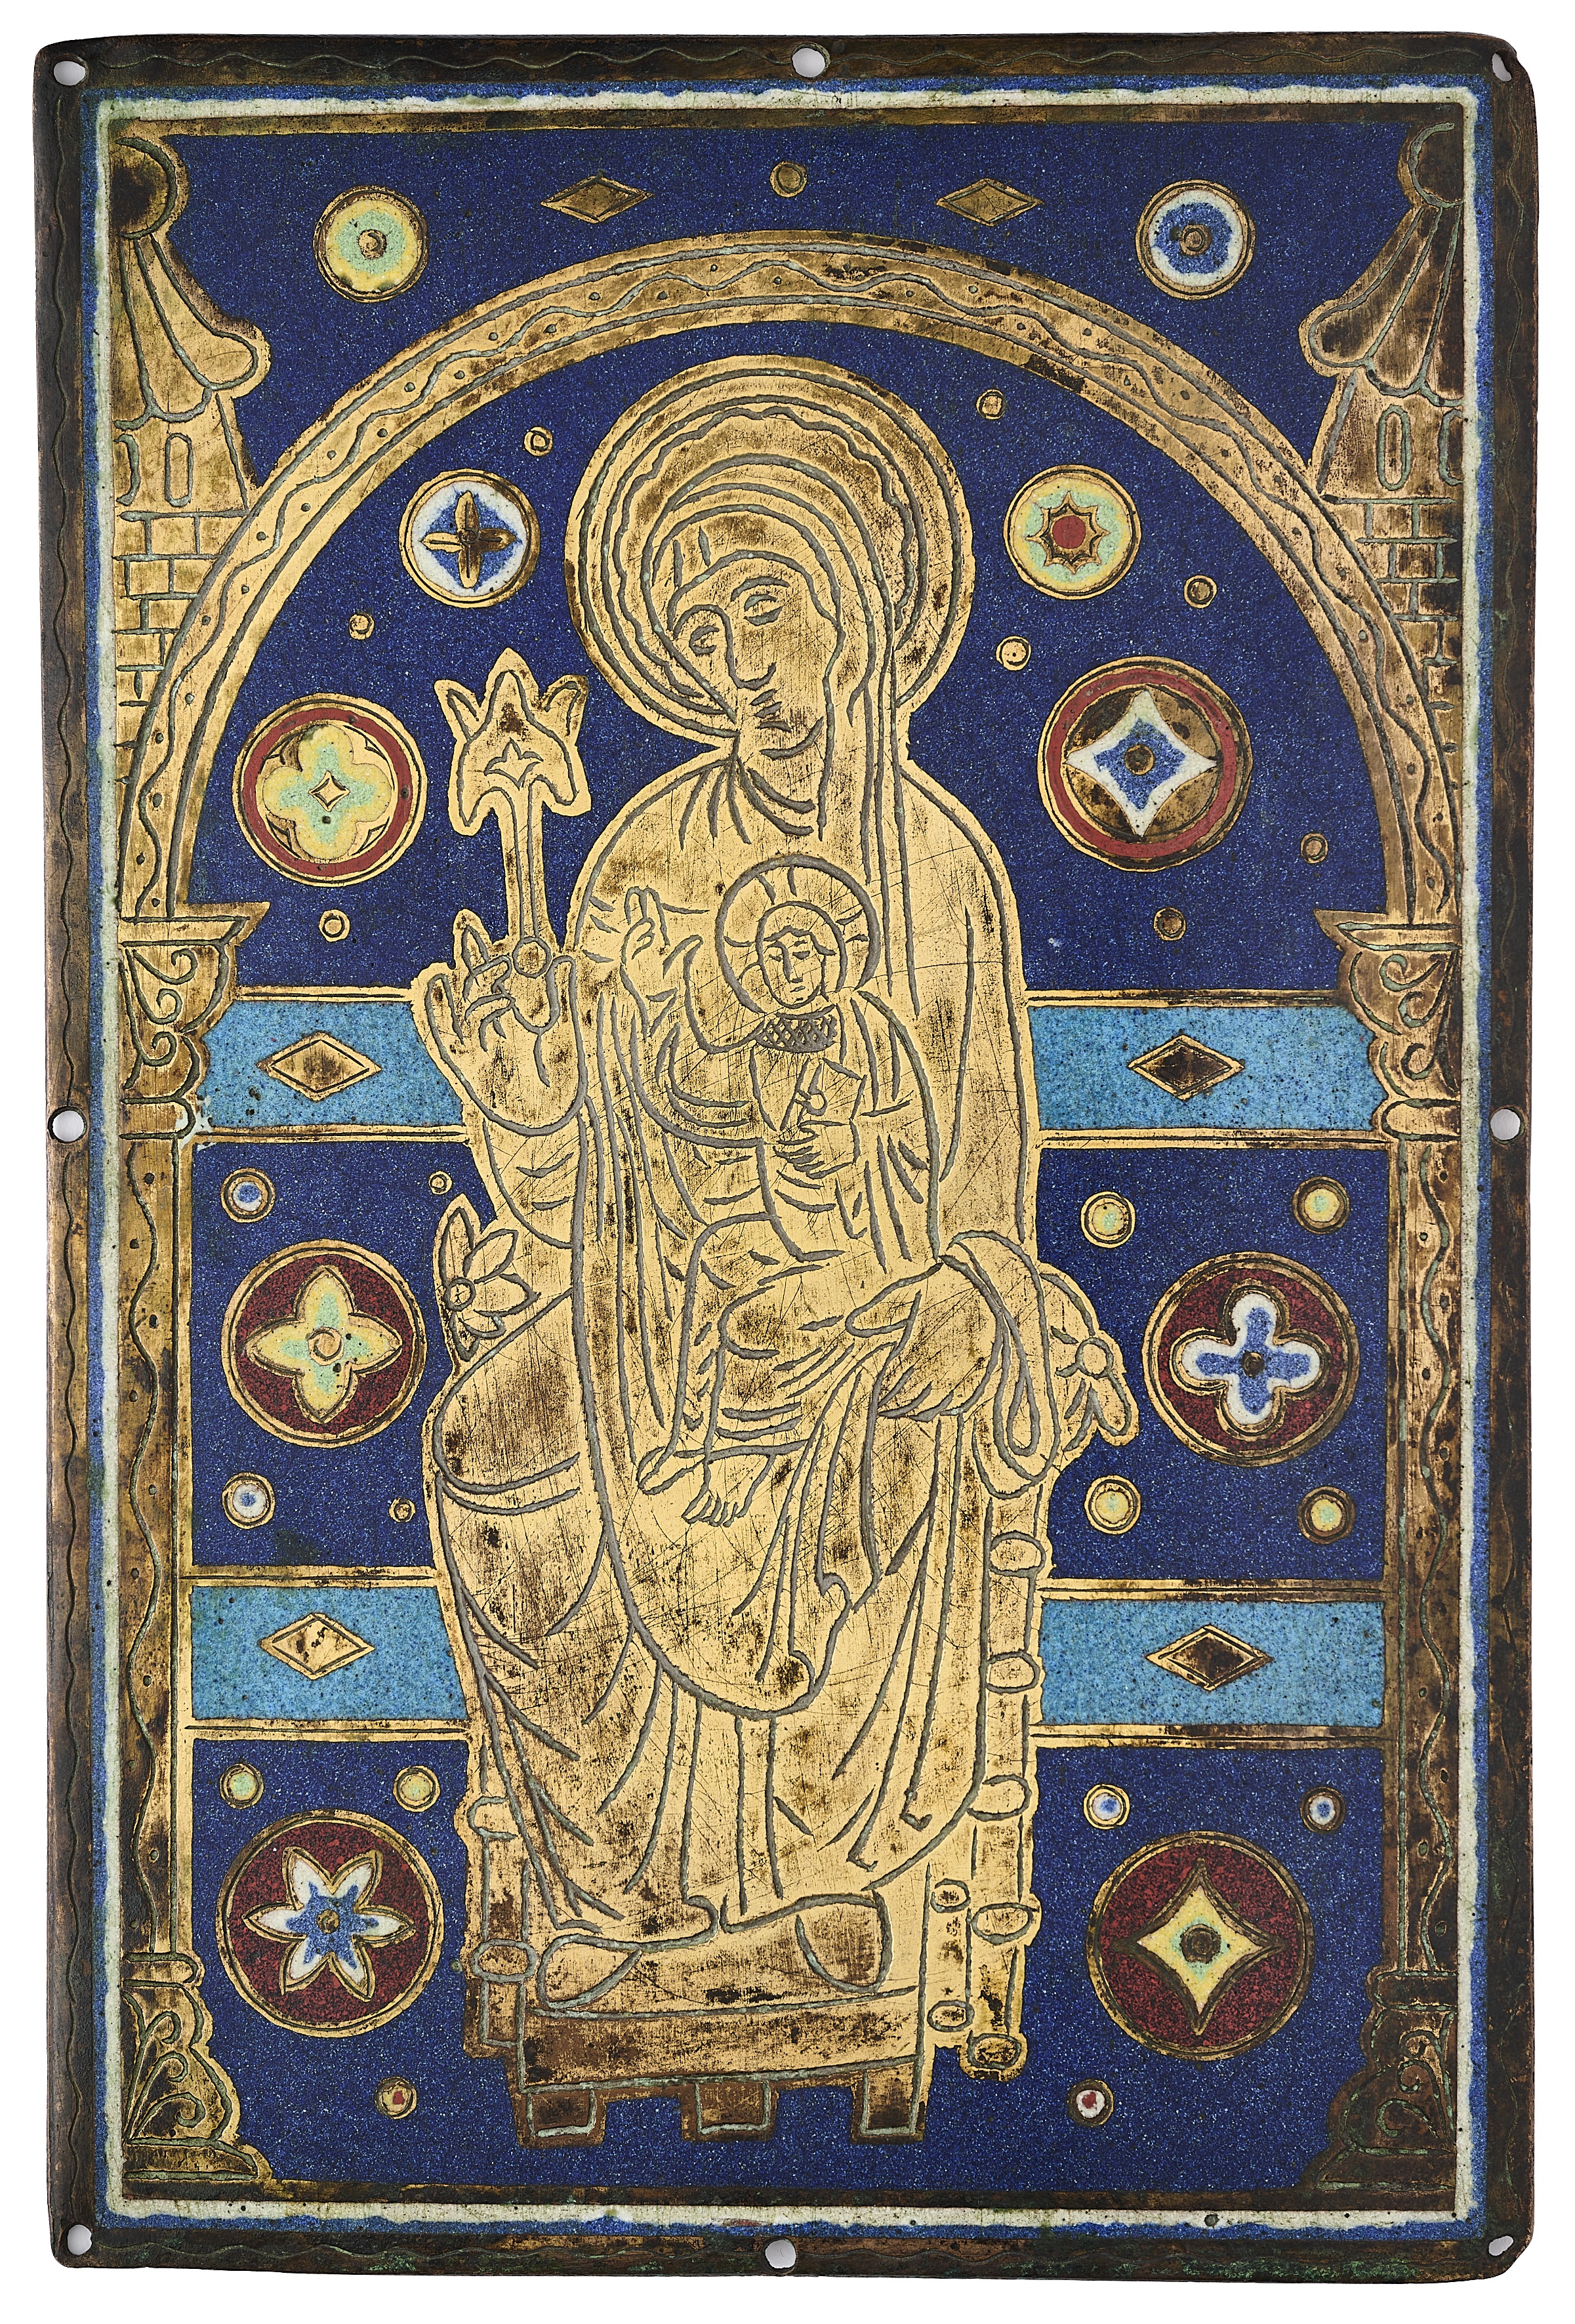 A CHAMPLEVE ENAMEL PANEL OF THE MADONNA AND CHILD, LIMOGES 13TH CENTURY STYLE